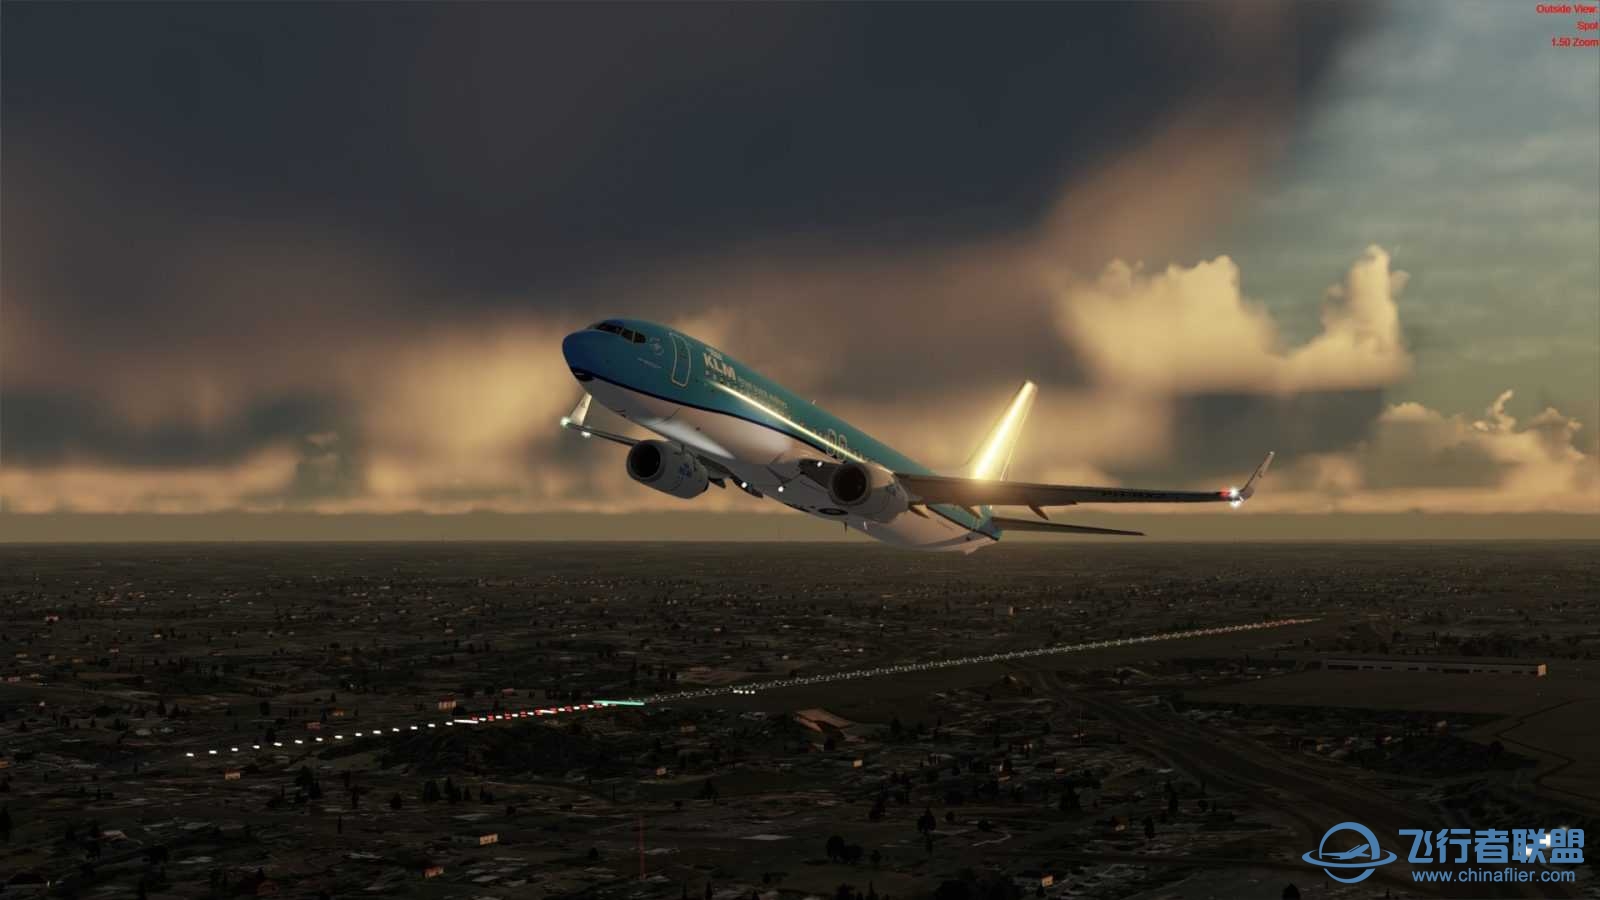 ifly-jets-advanced-series-737ng-release-candidate-p3d-13-1600x900.jpg